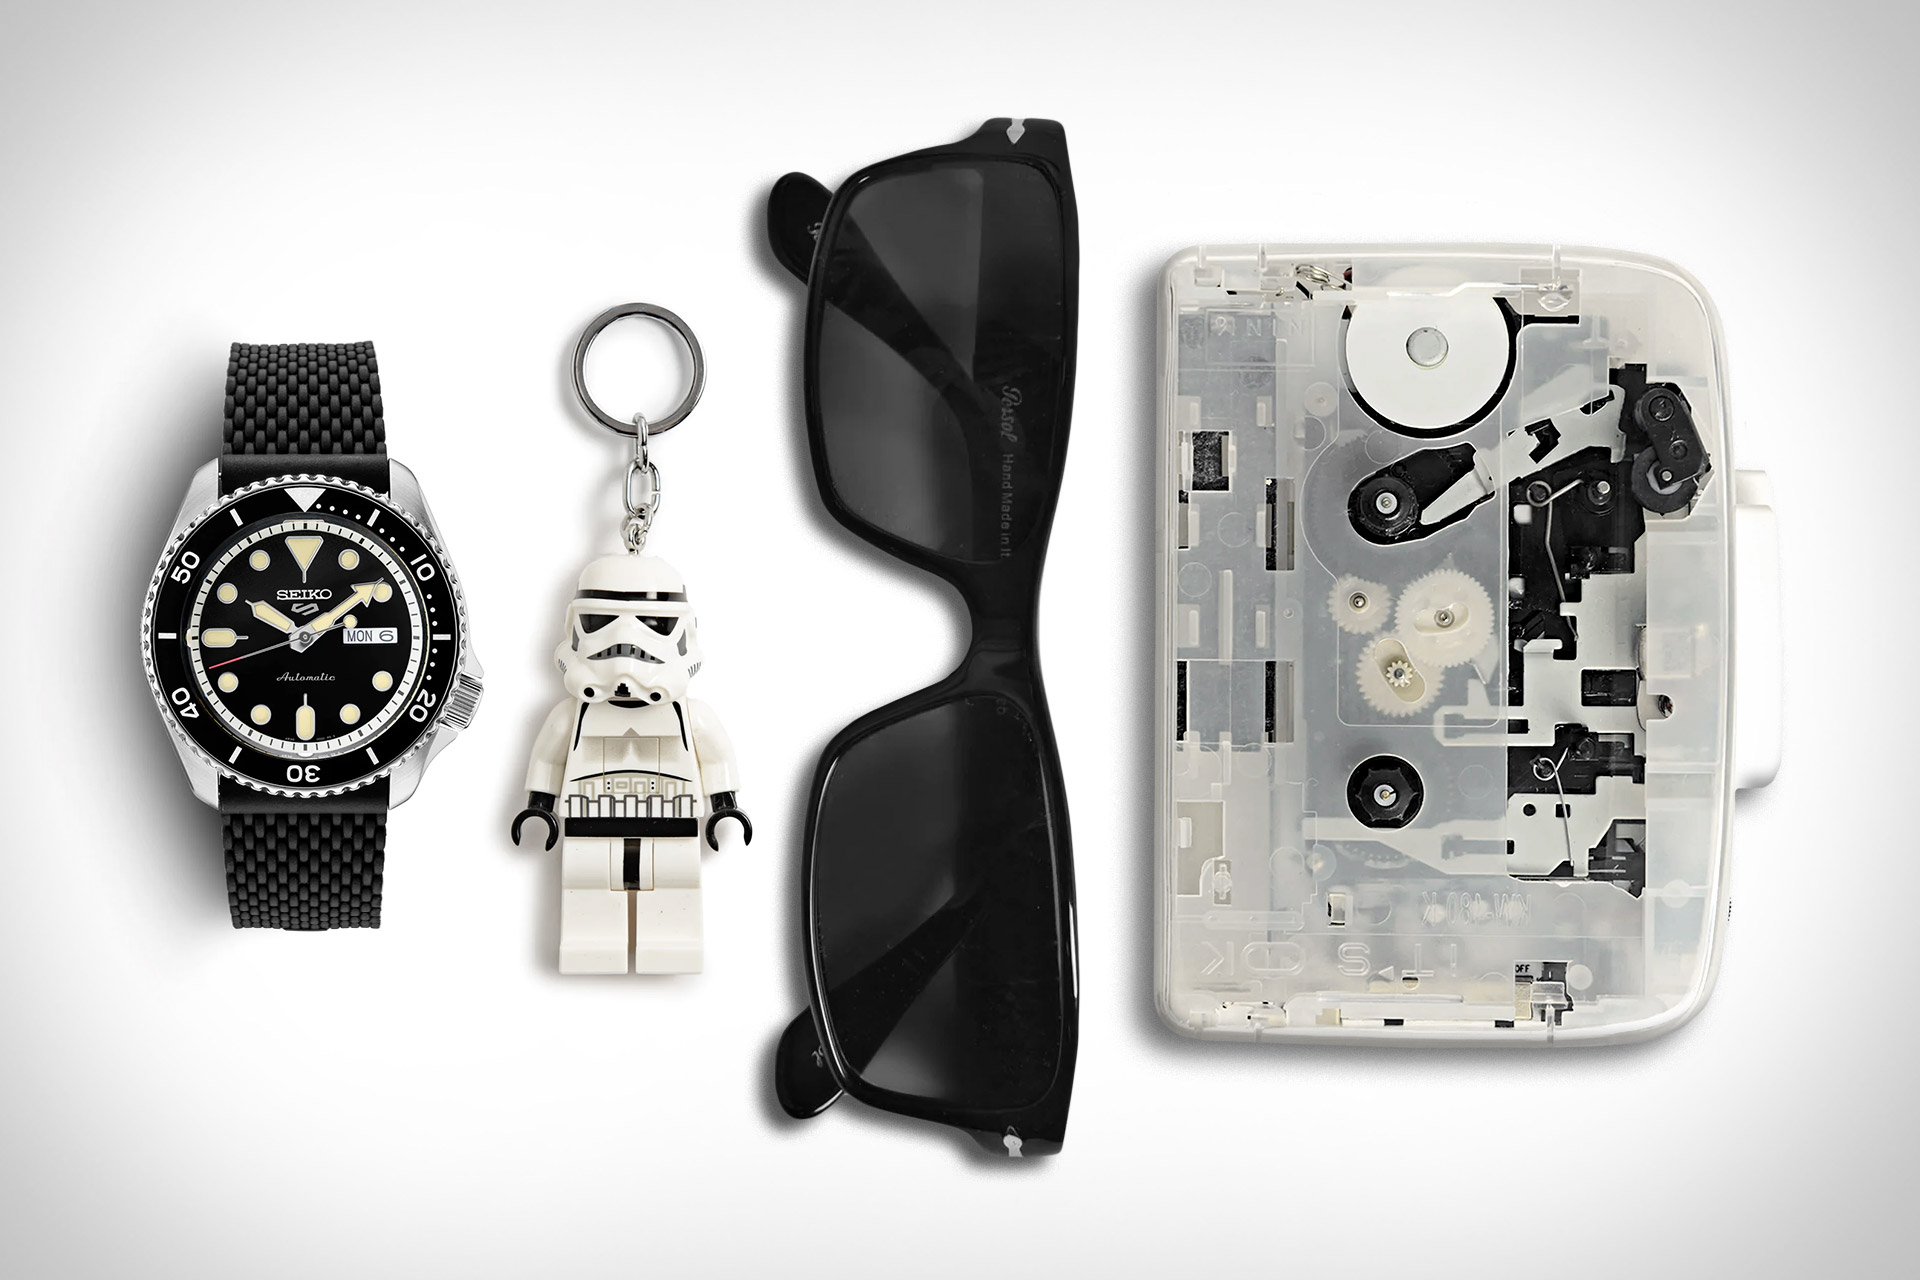 Everyday Carry: Stormtrooper | Uncrate, #Everyday #Carry #Stormtrooper #Uncrate